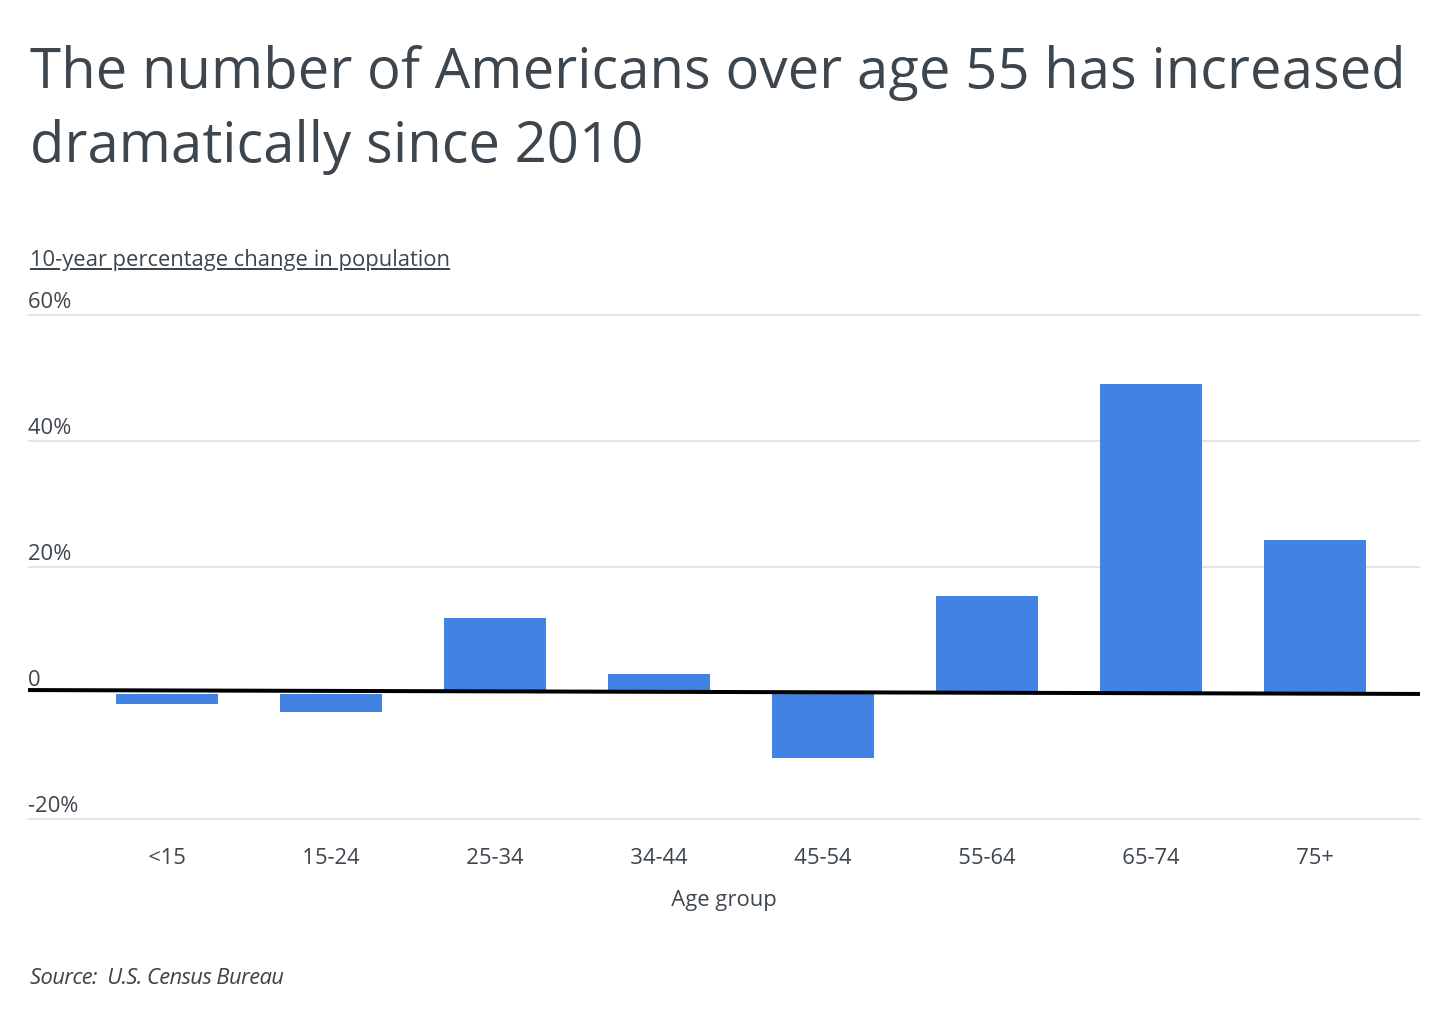 The number of Americans over age 55 has increased dramatically since 2010